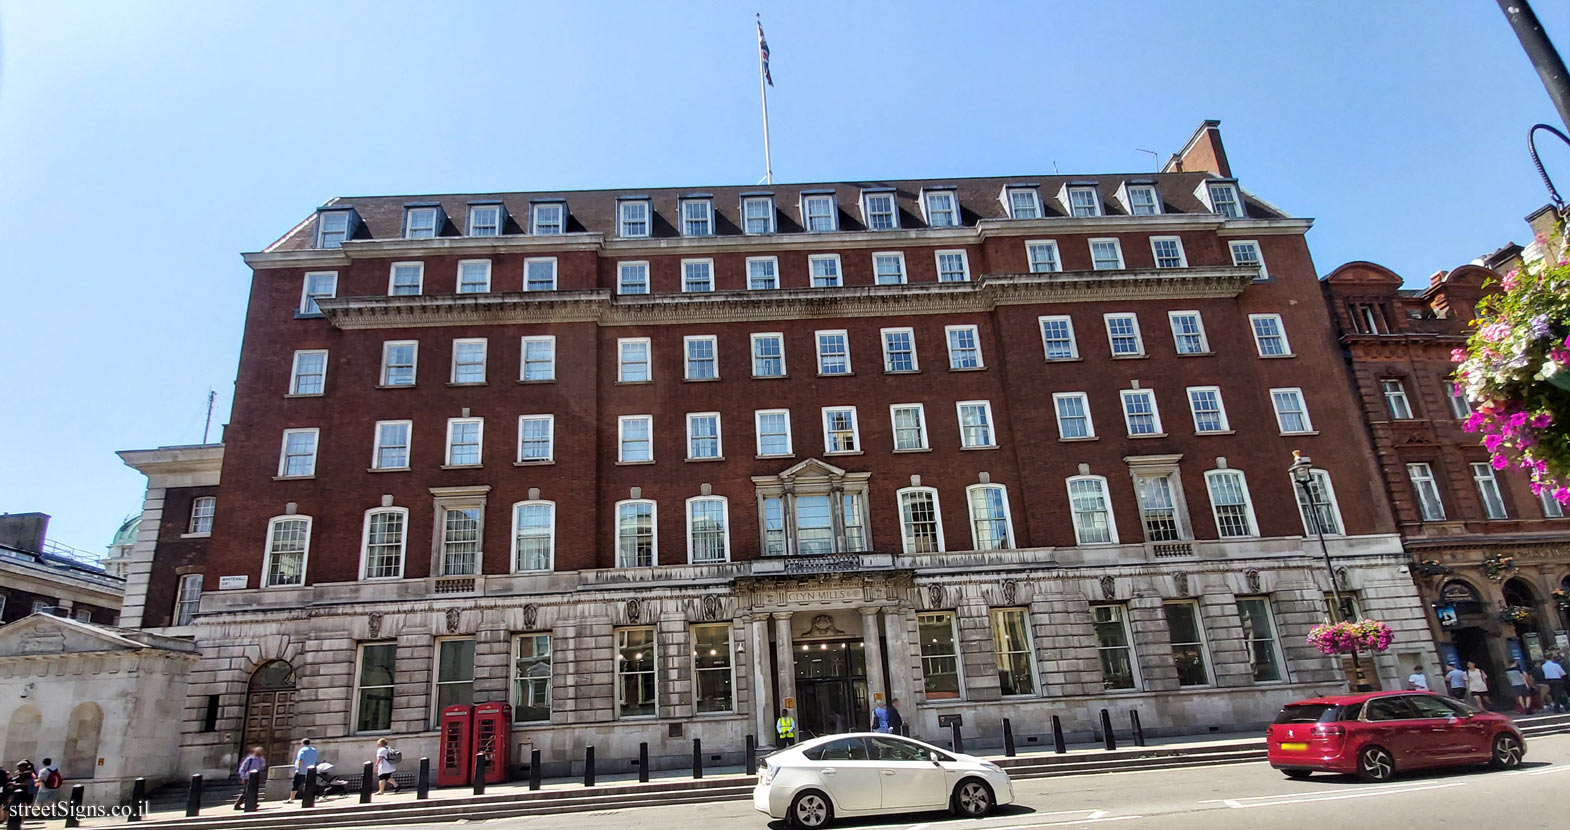 London - The house where Canterbury County - New Zealand was planned - 22 Whitehall, Westminster, London SW1A 2BX, UK